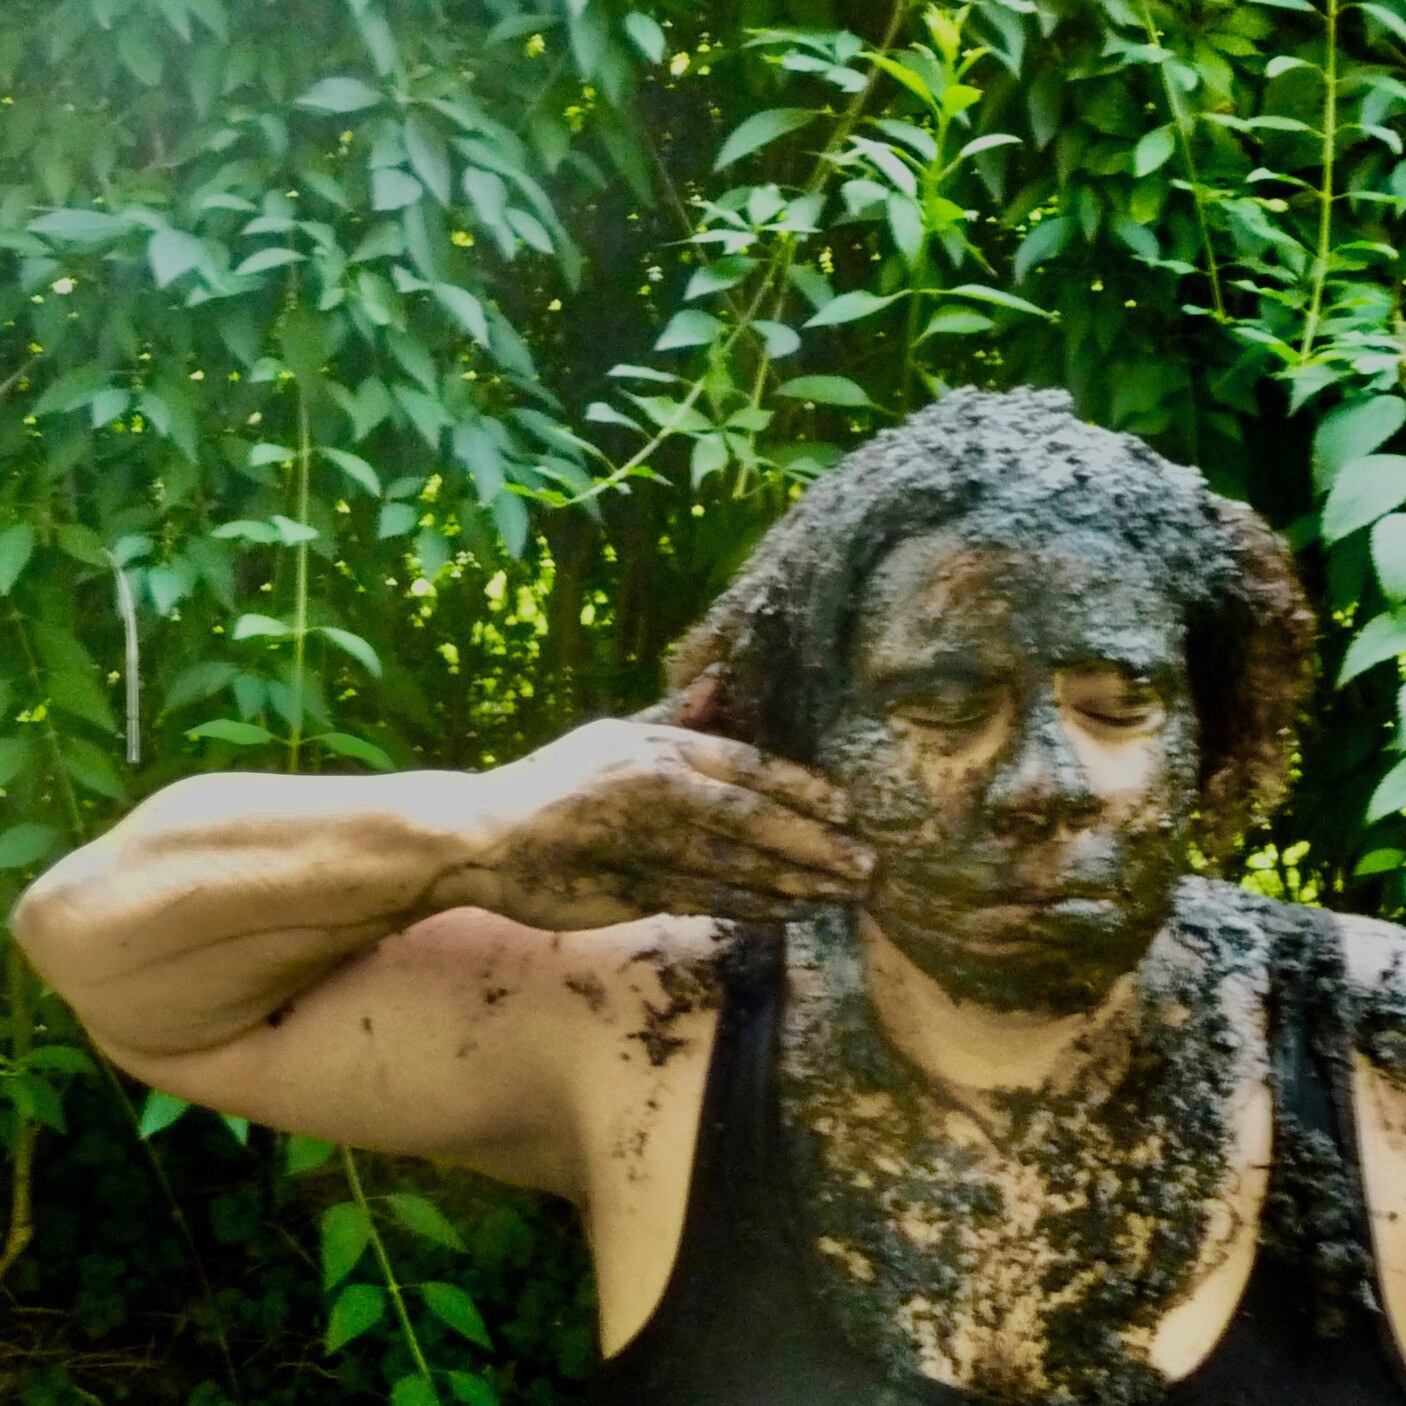 A woman of color smearing mud on her face